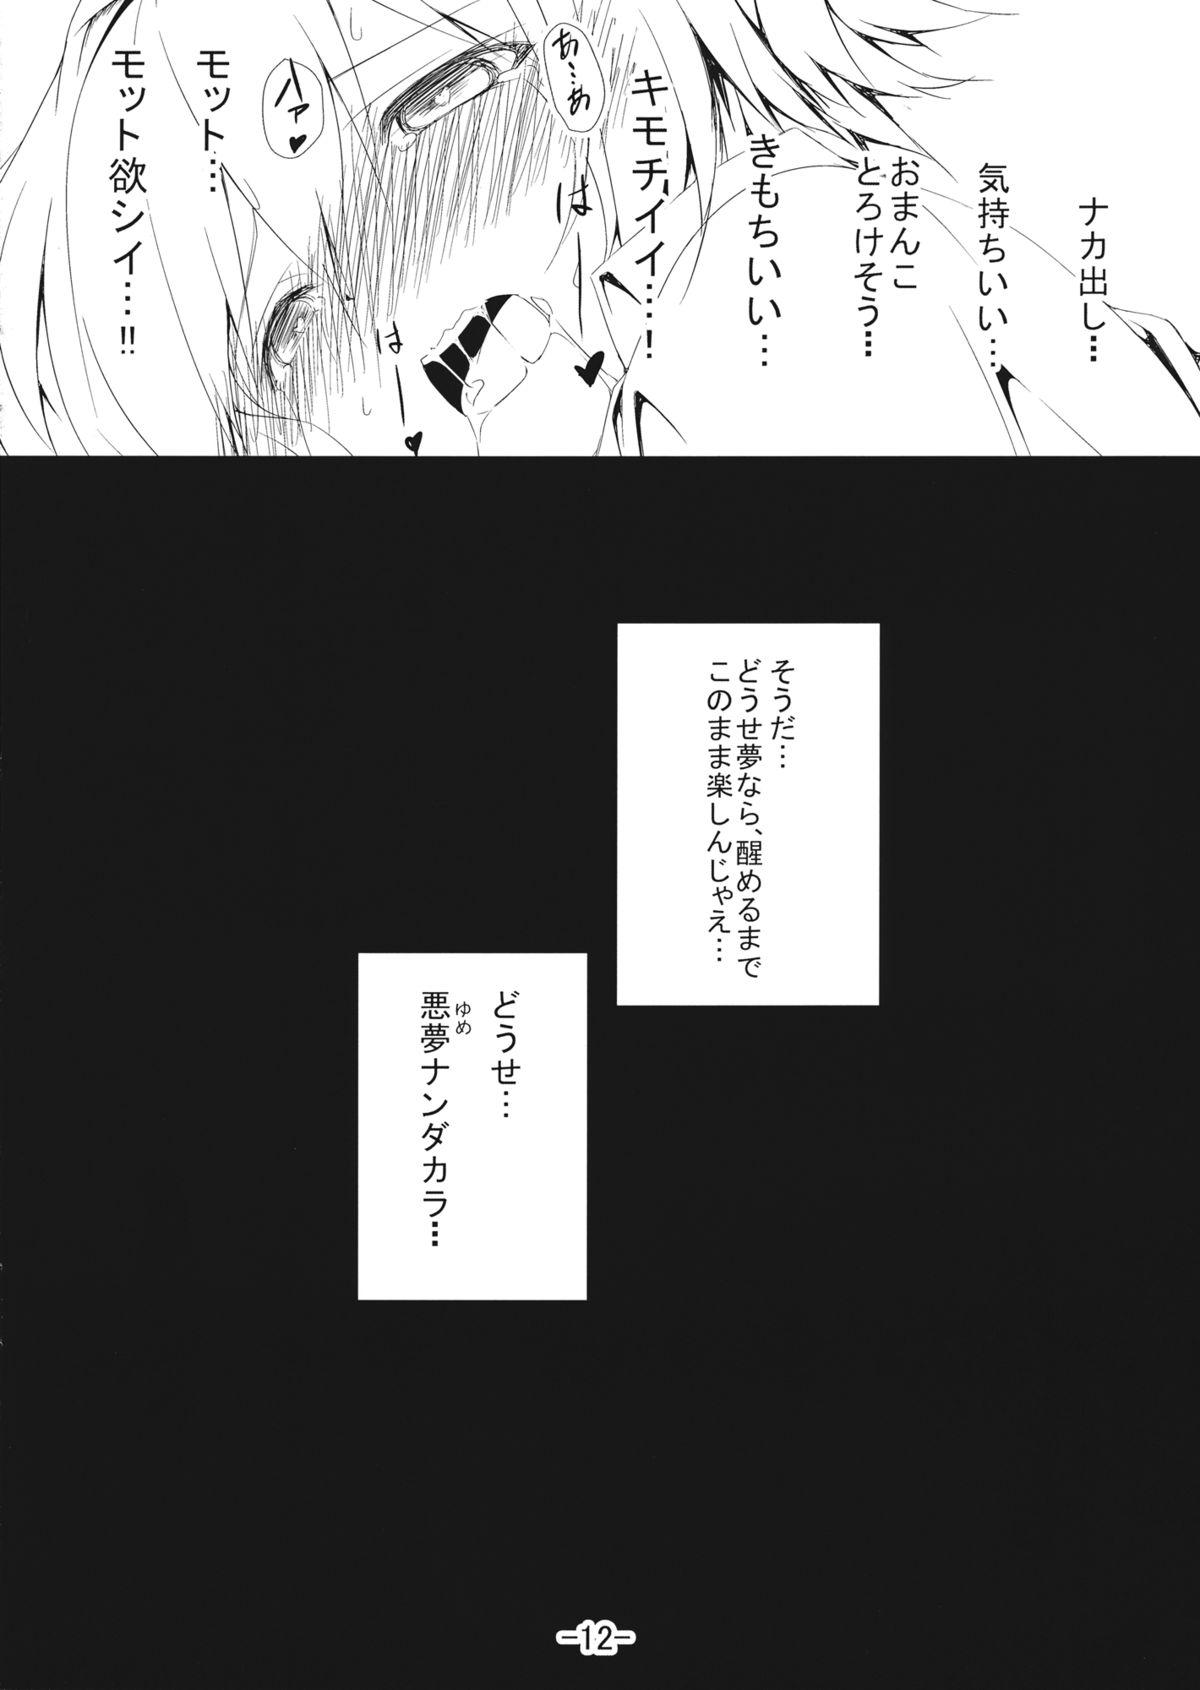 Screaming Alice in Nightmare - Touhou project Emo - Page 11